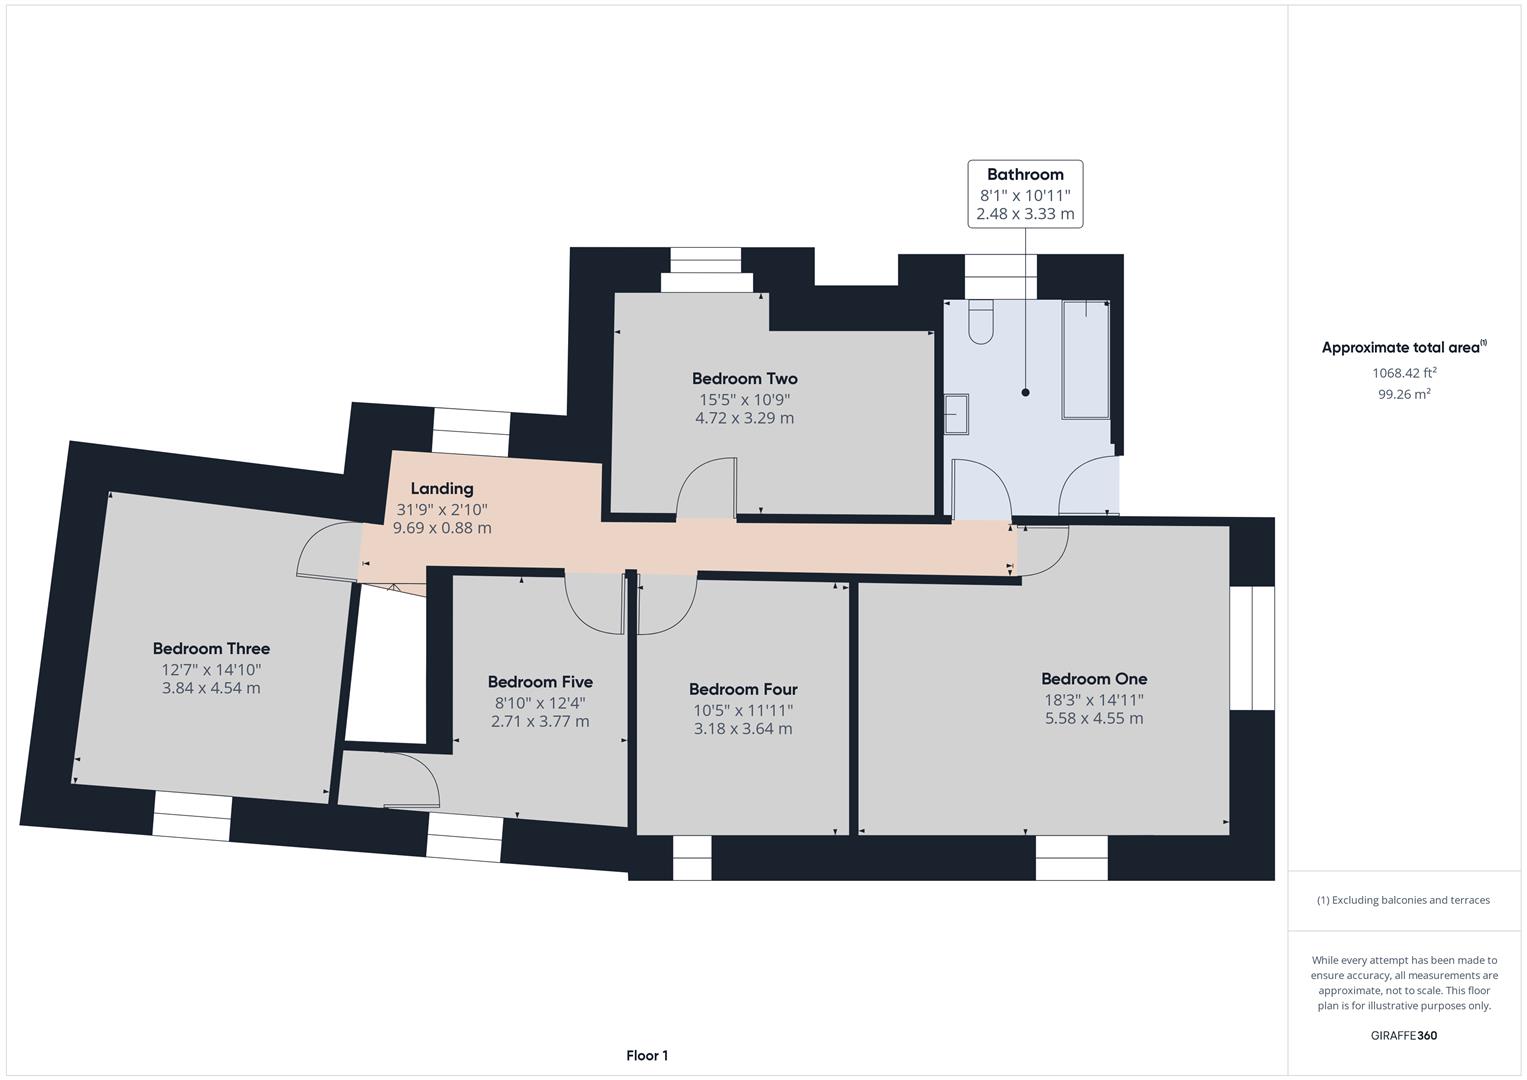 5 bed detached house to rent, Beaworthy - Property floorplan